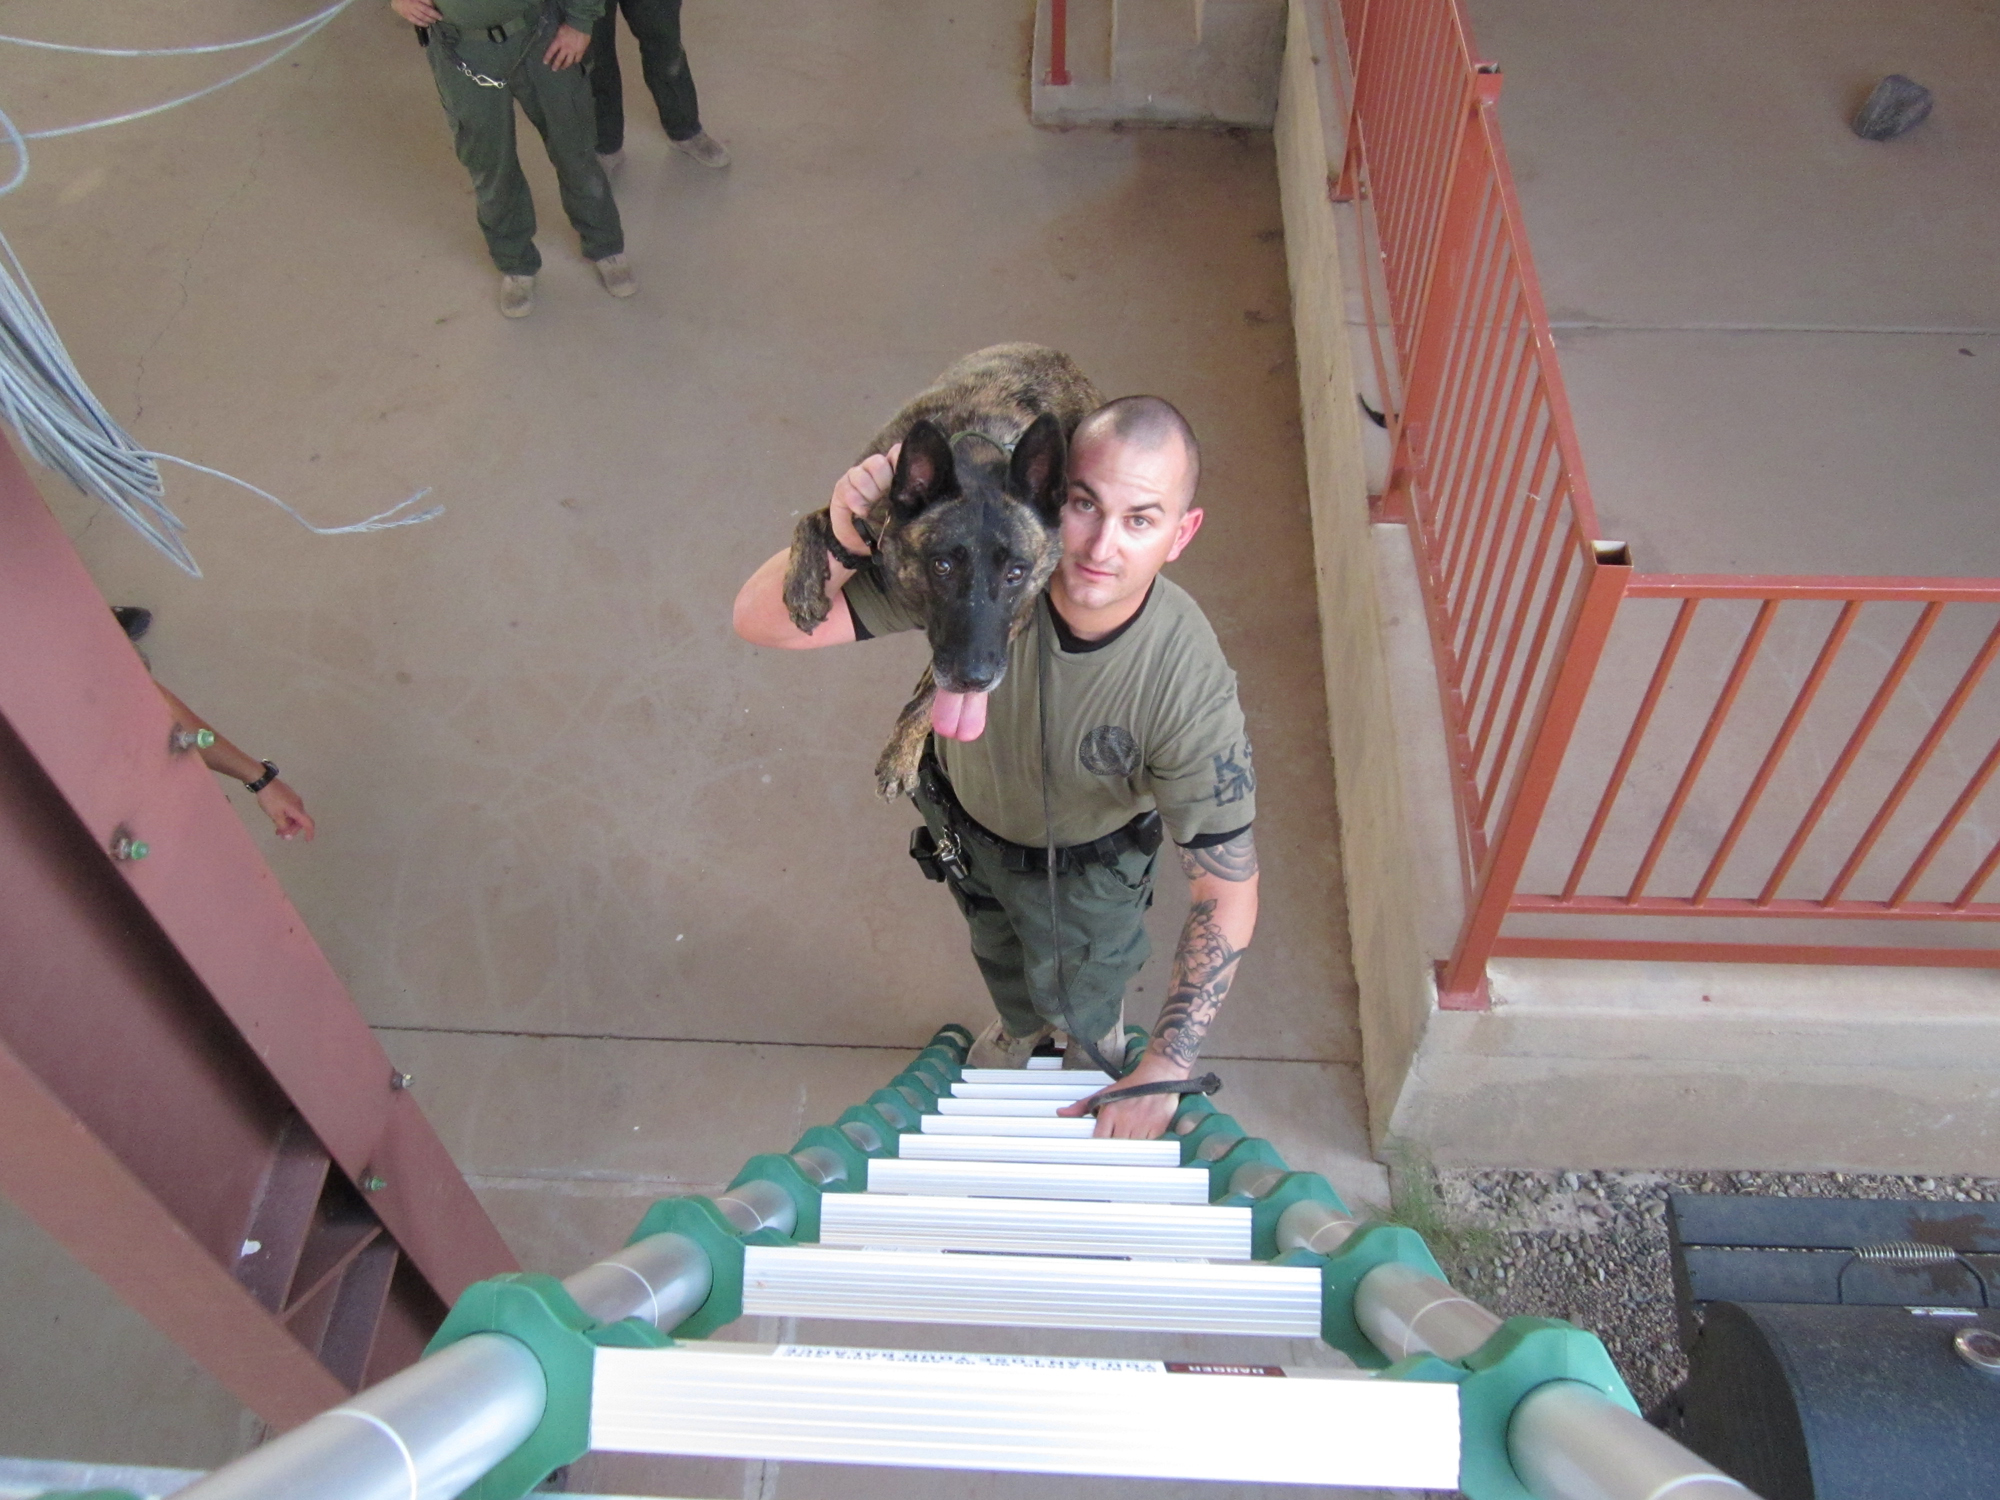 Pinal County Sheriff's Office Canine Unit posing with Xtend+Climb telescoping ladders